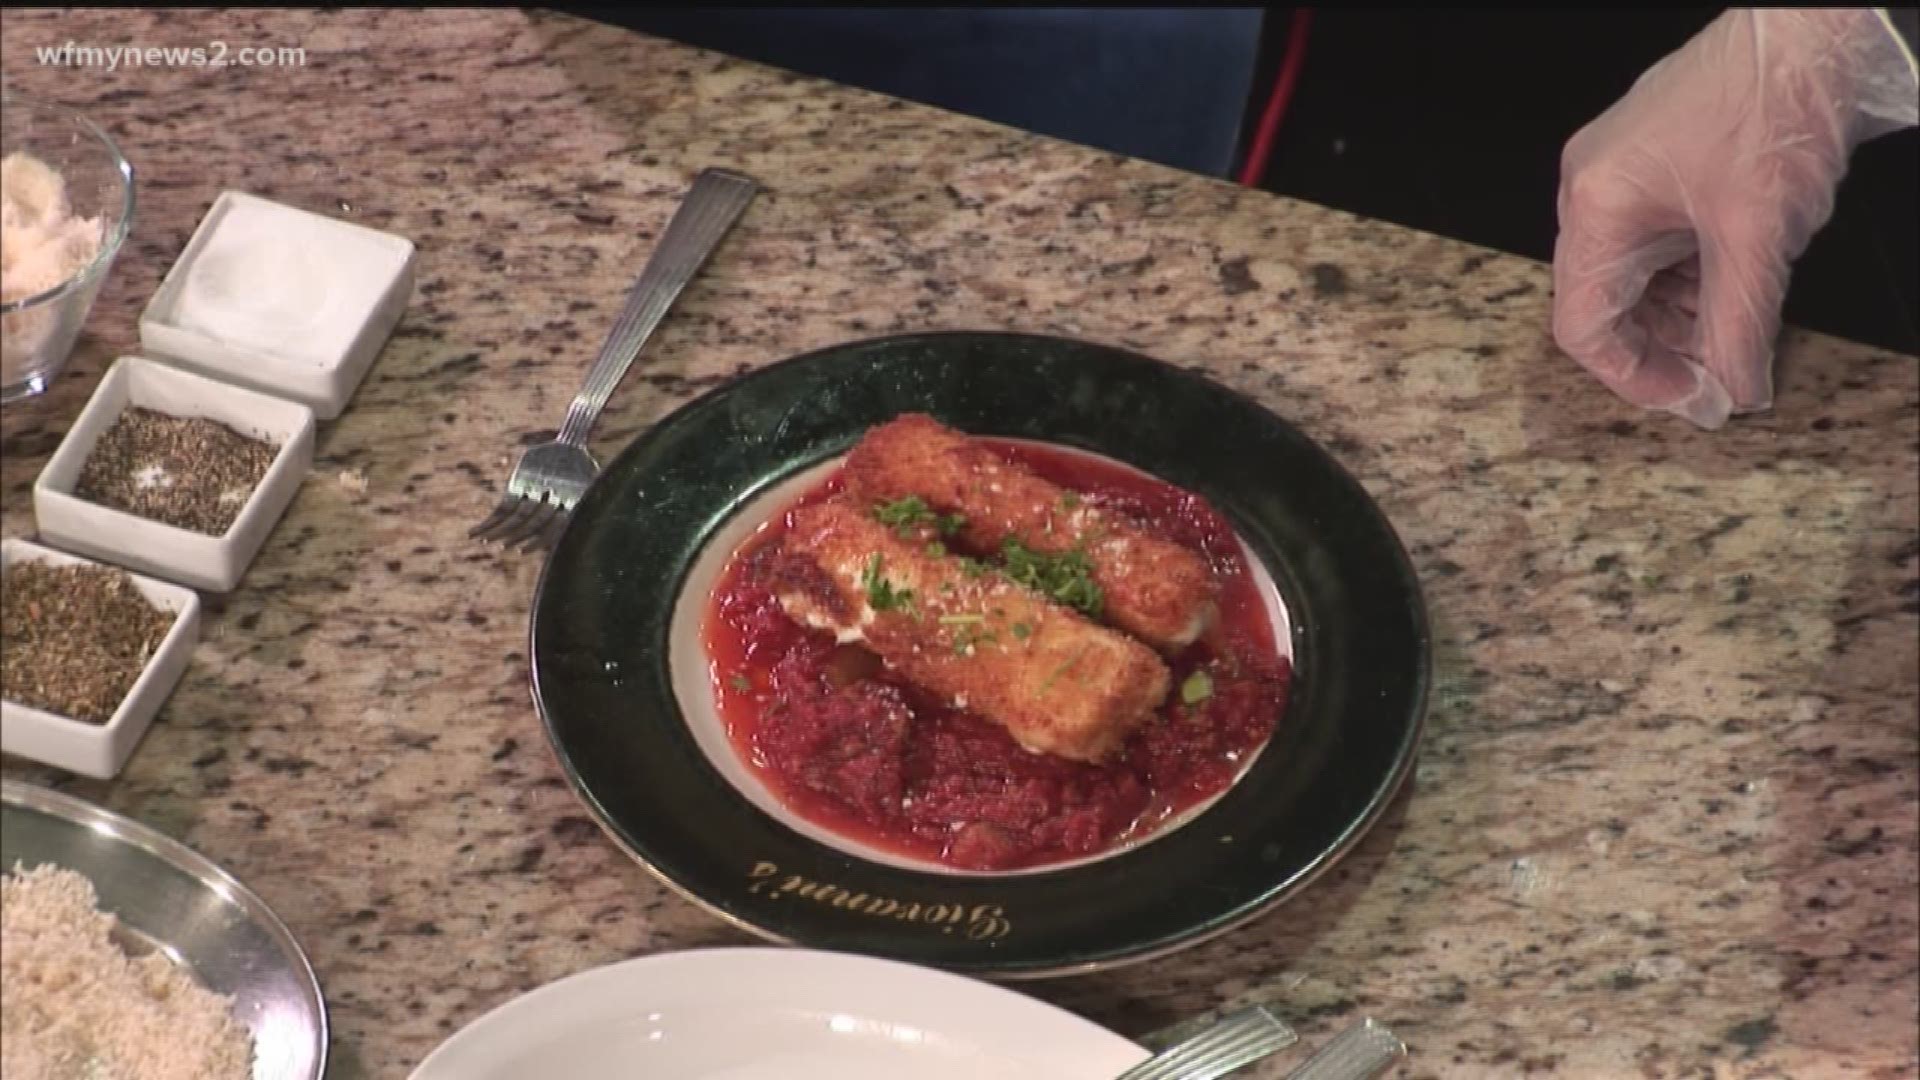 Giovanni's joins us in the news 2 kitchen with their takes on Italian classics.